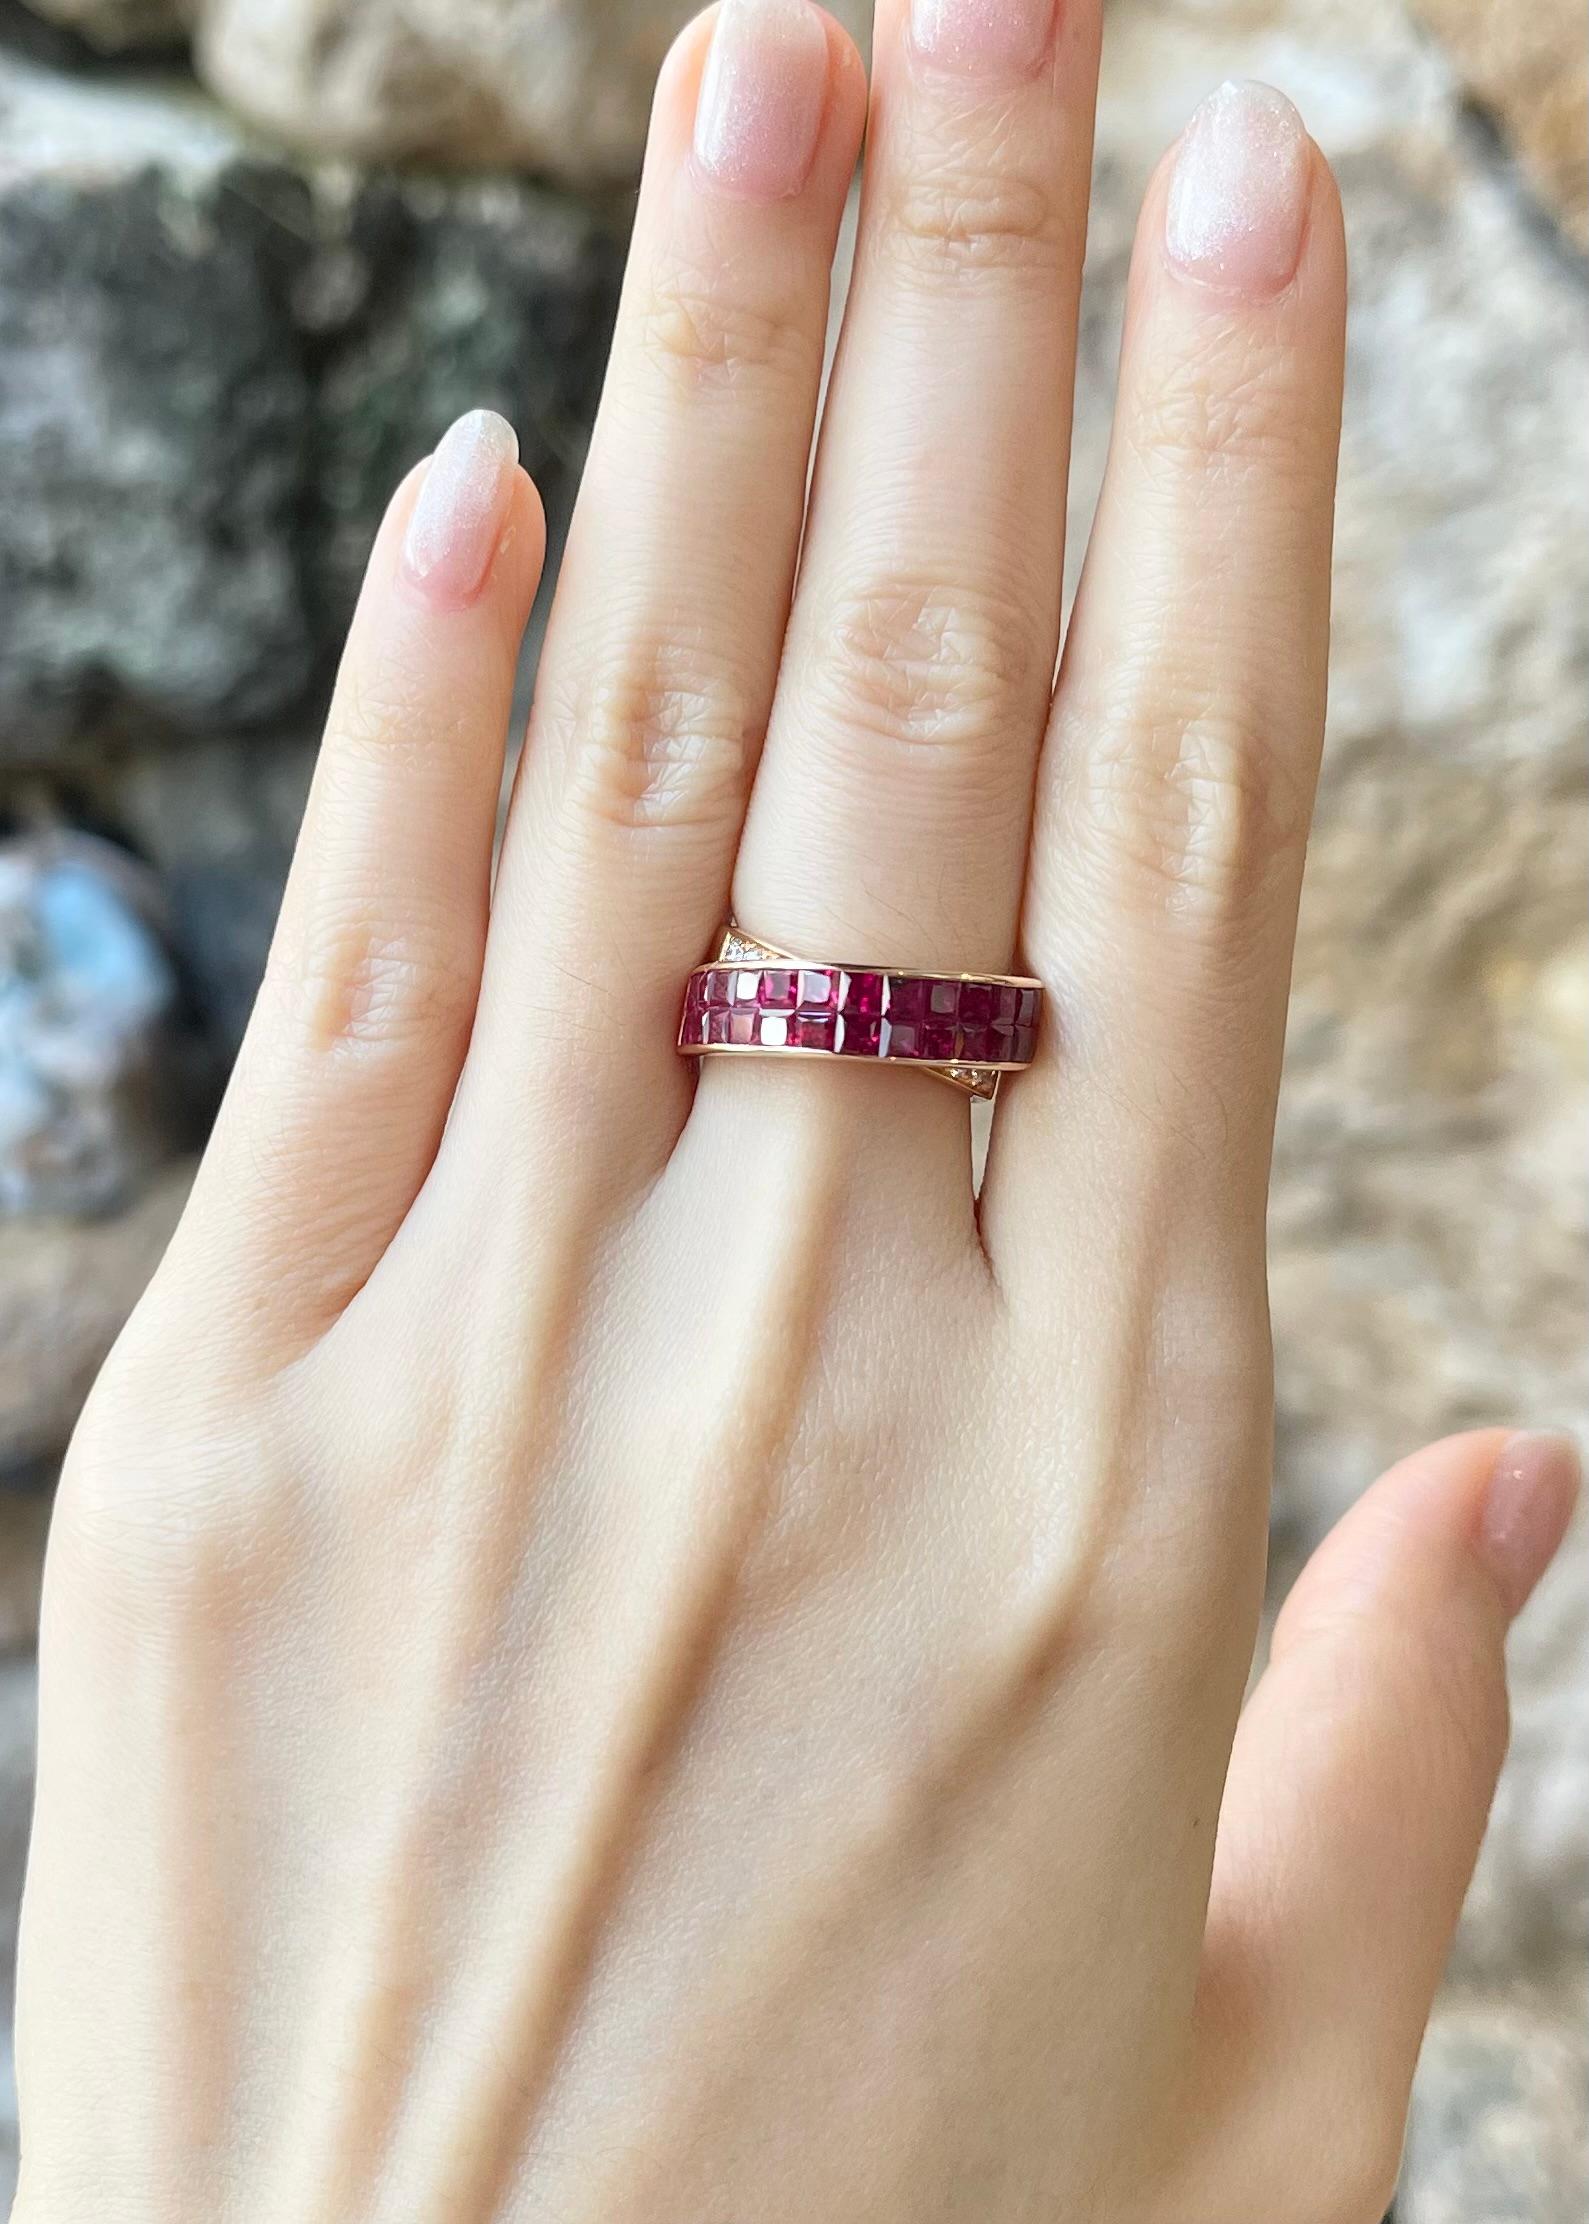 Ruby 3.66 carats with Diamond 0.31 carat Ring set in 18K Rose Gold Settings

Width:  2.2 cm 
Length: 0.6 cm
Ring Size: 51
Total Weight: 9.55 grams

